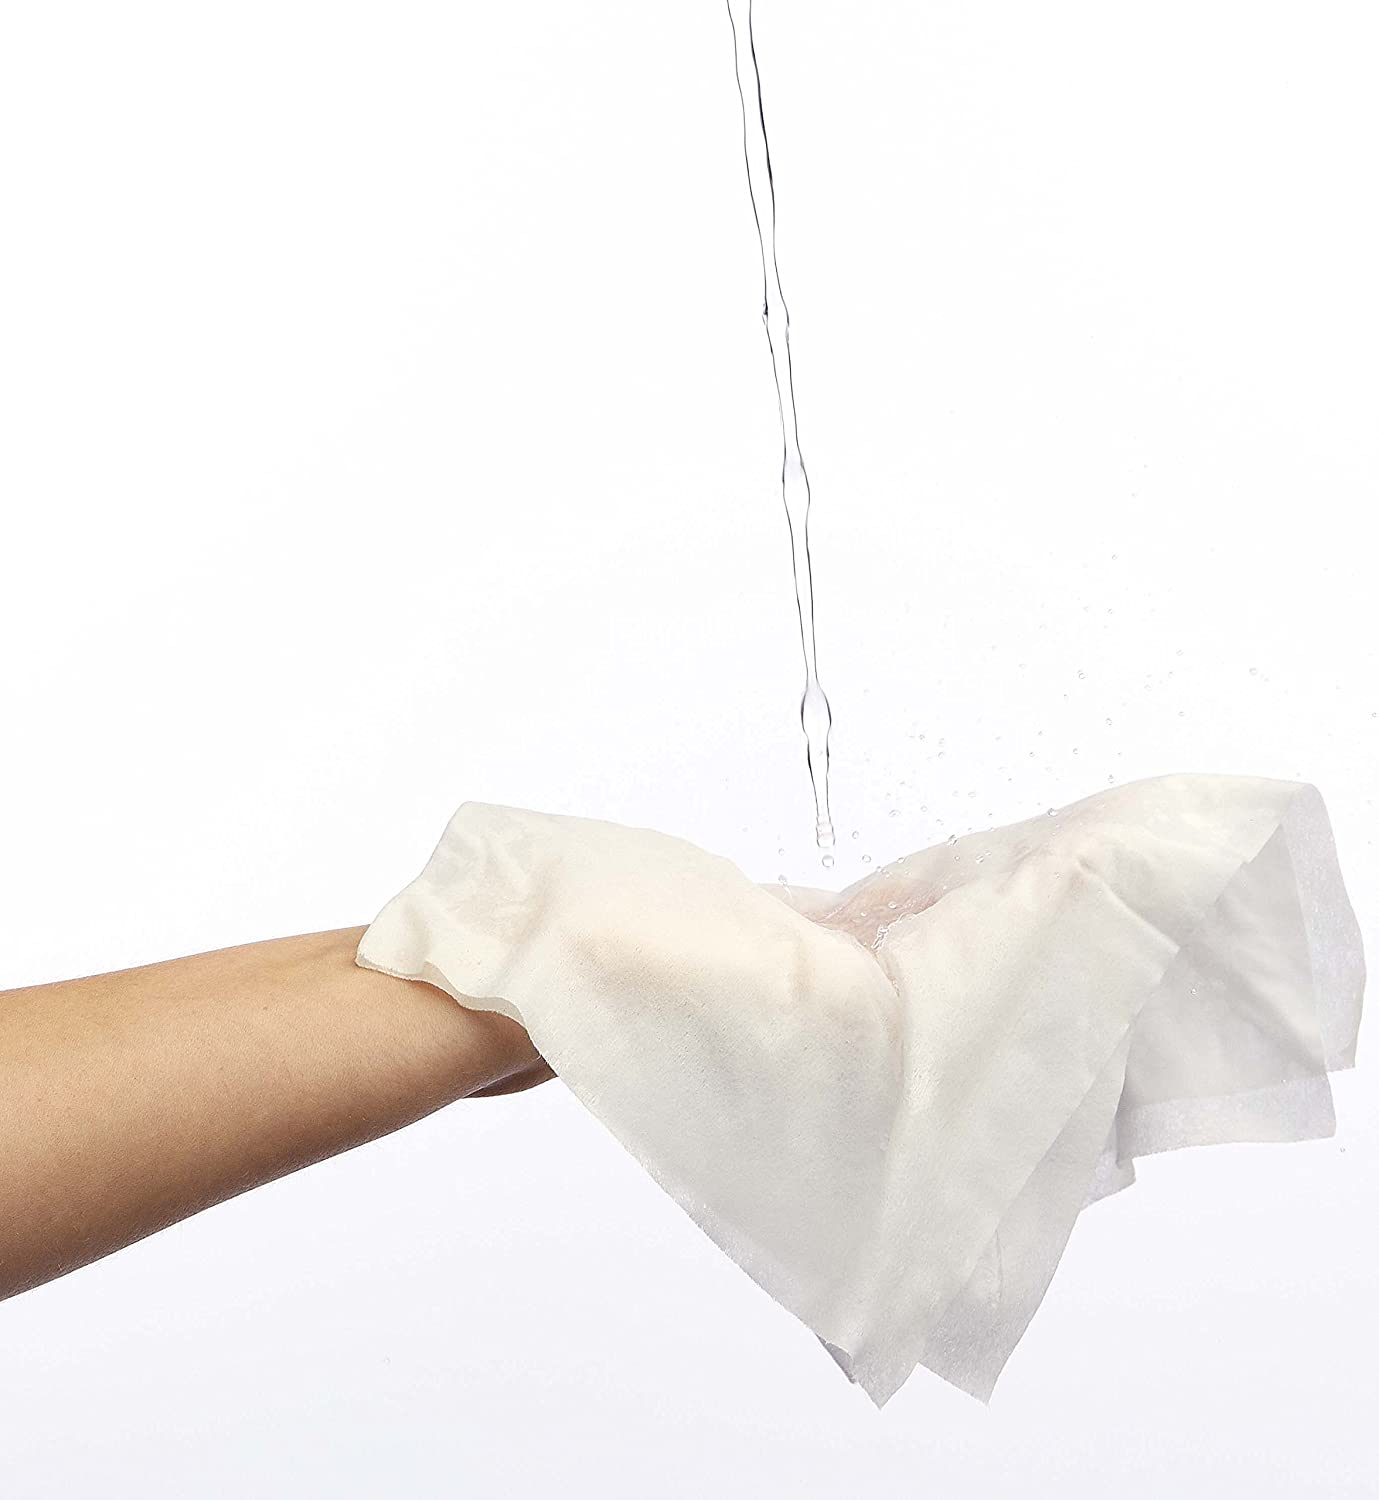 Dry Wipes Disposable Washcloths